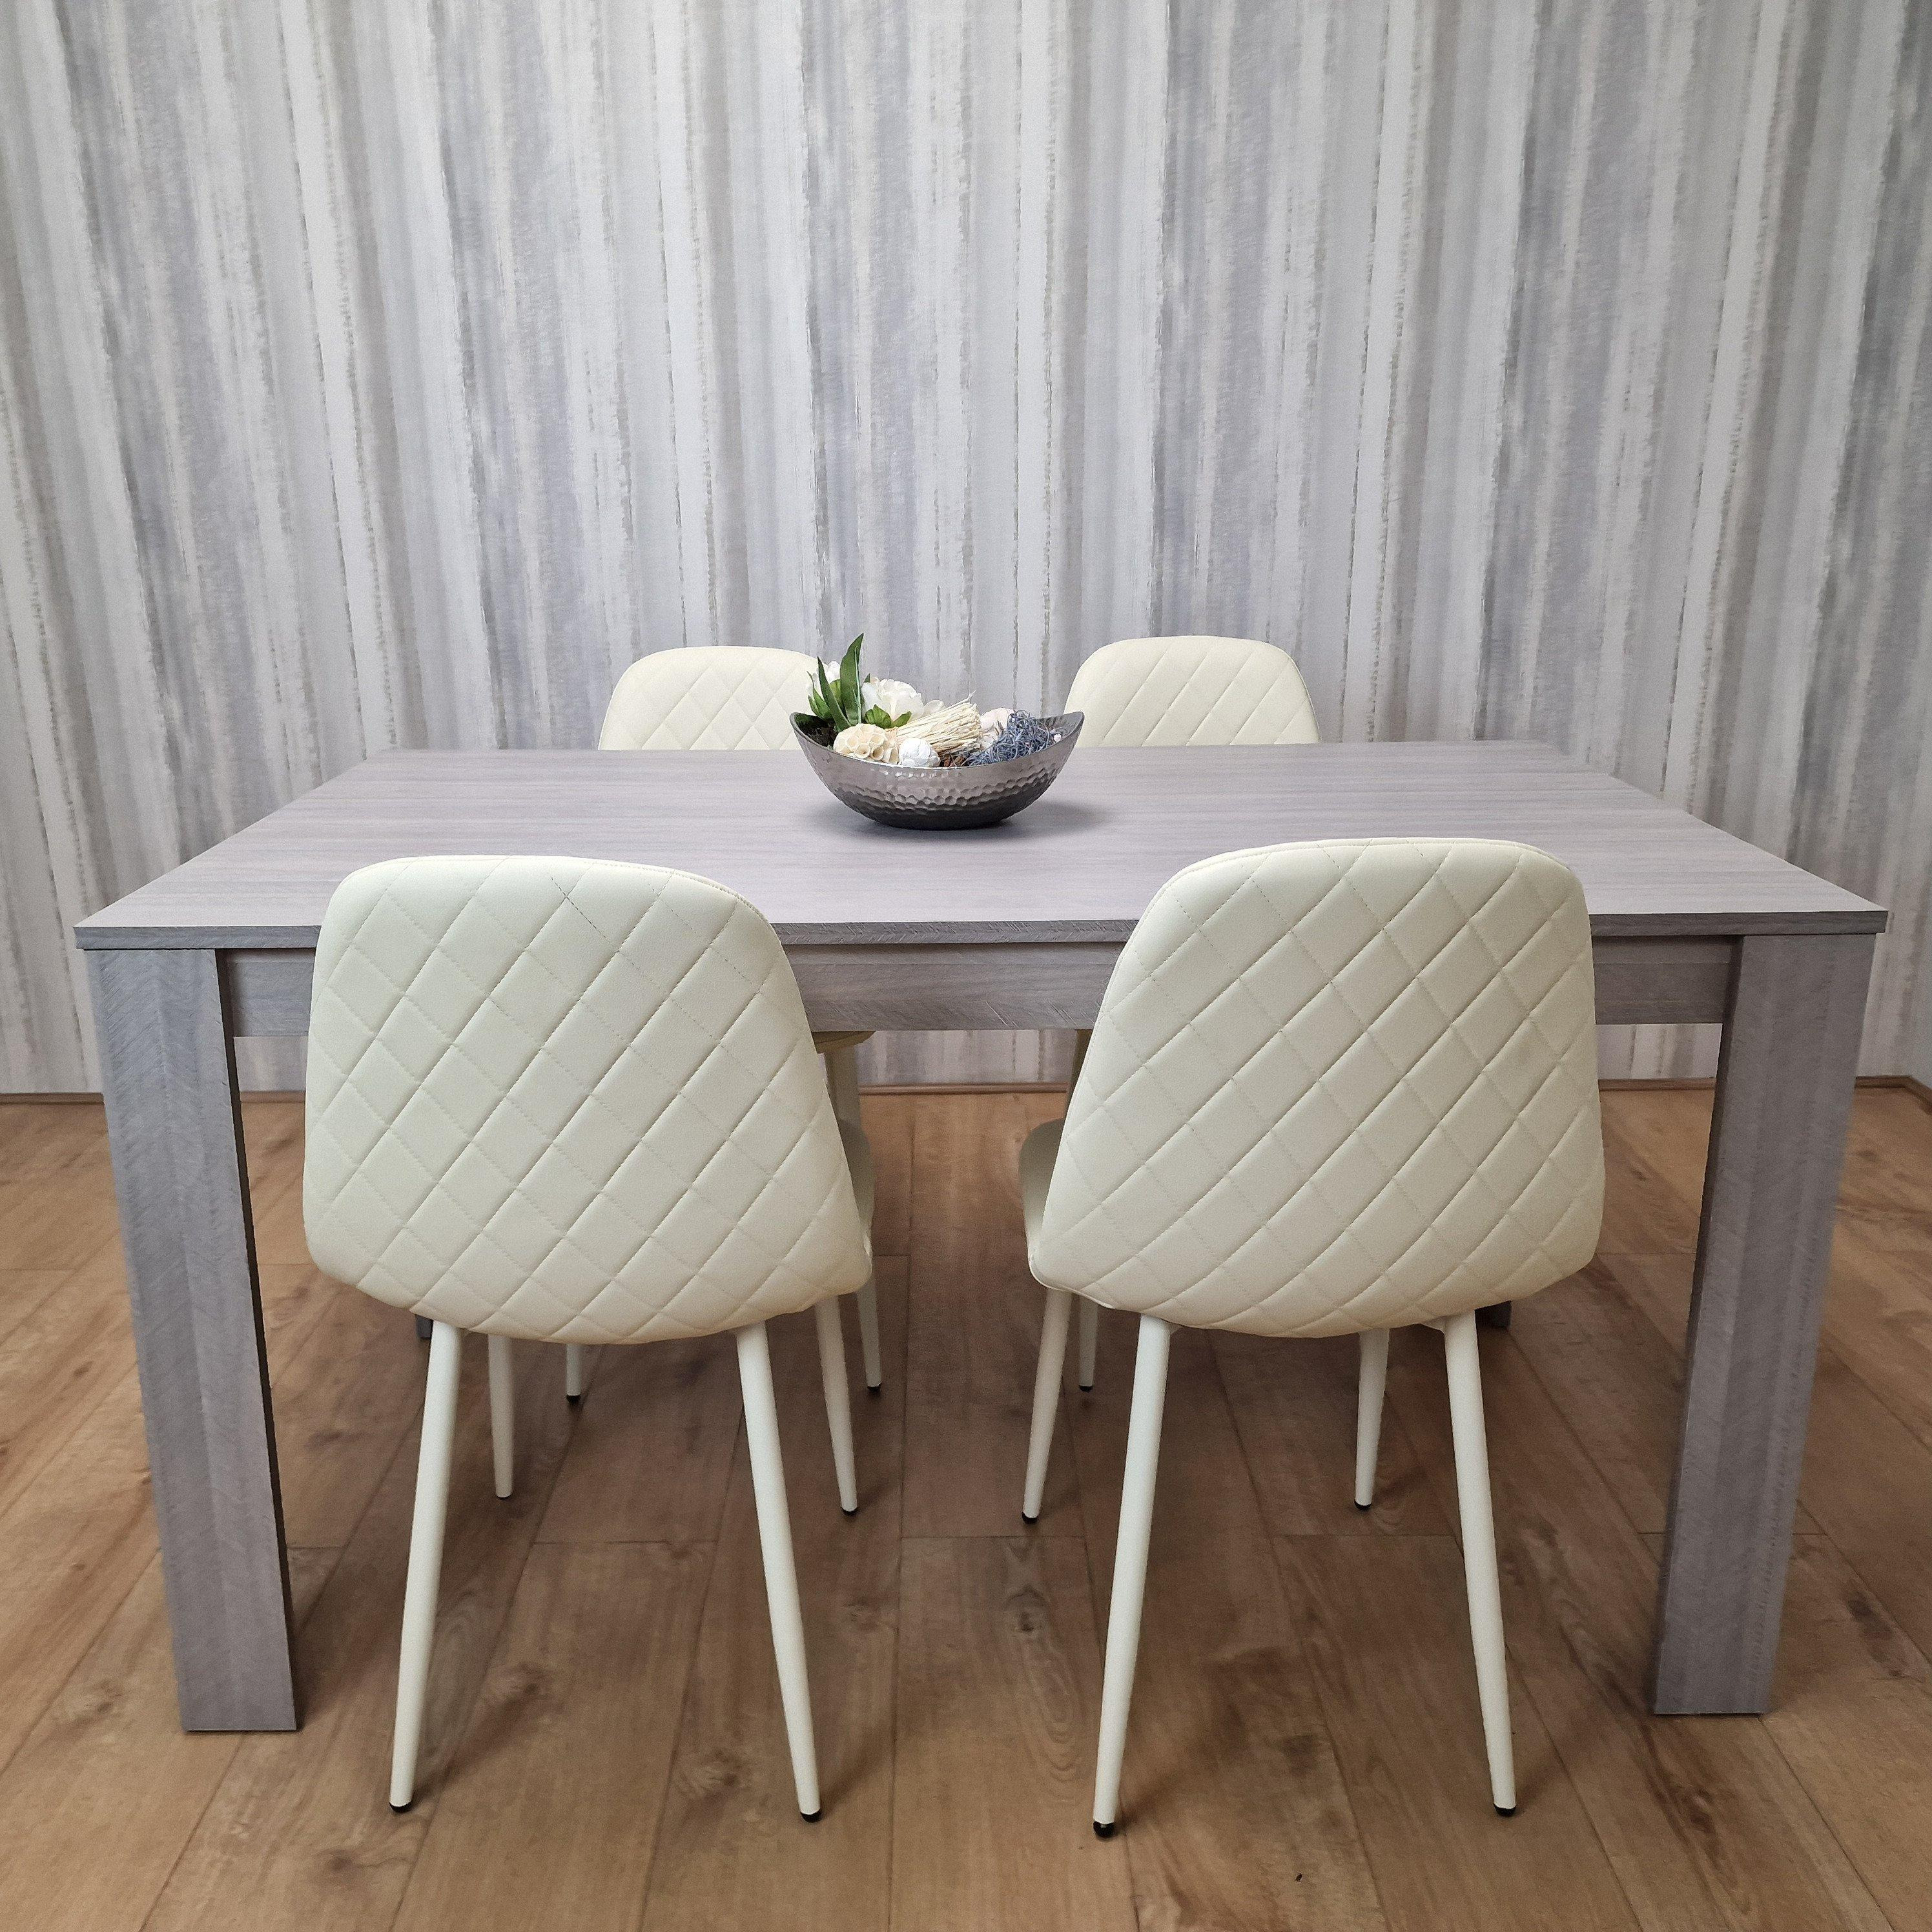 Dining Table With 4 Cream Stitched Chairs Kitchen Dining Table for 4 Dining Room Dining Set - image 1